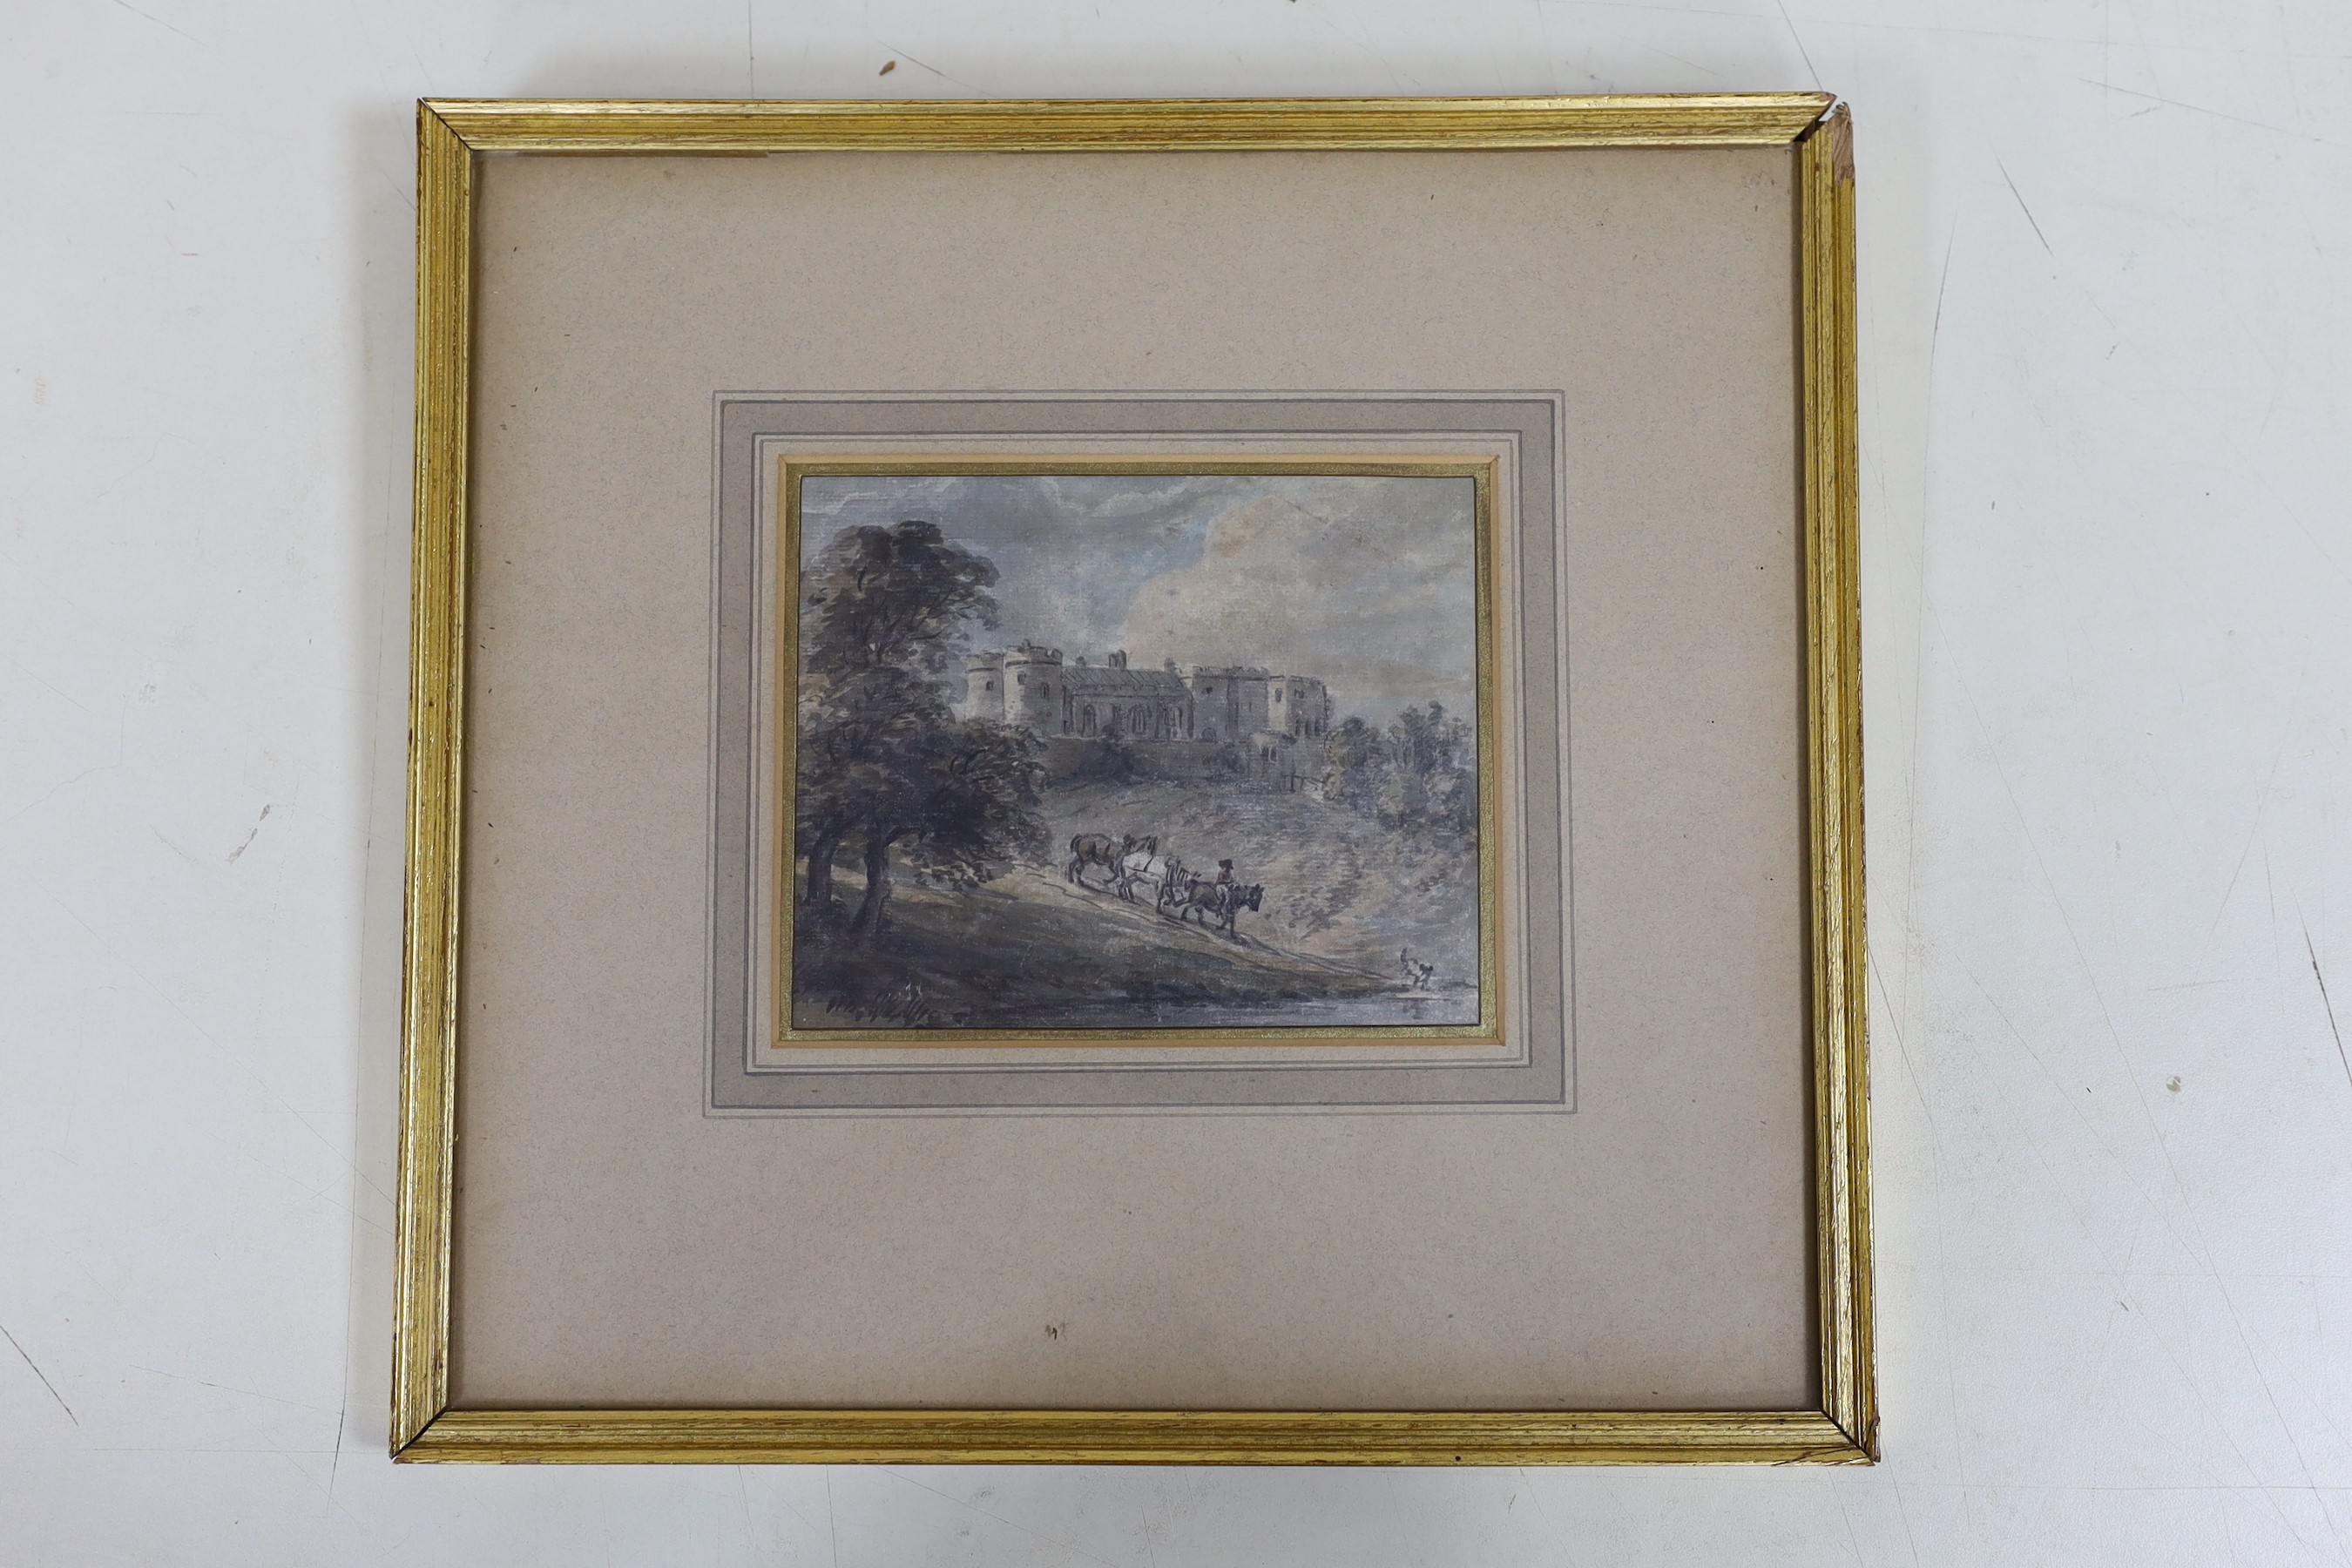 Paul Sandby (1725-1809), watercolour on paper, Travellers passing a castle, 13 x 16cm - Image 2 of 4